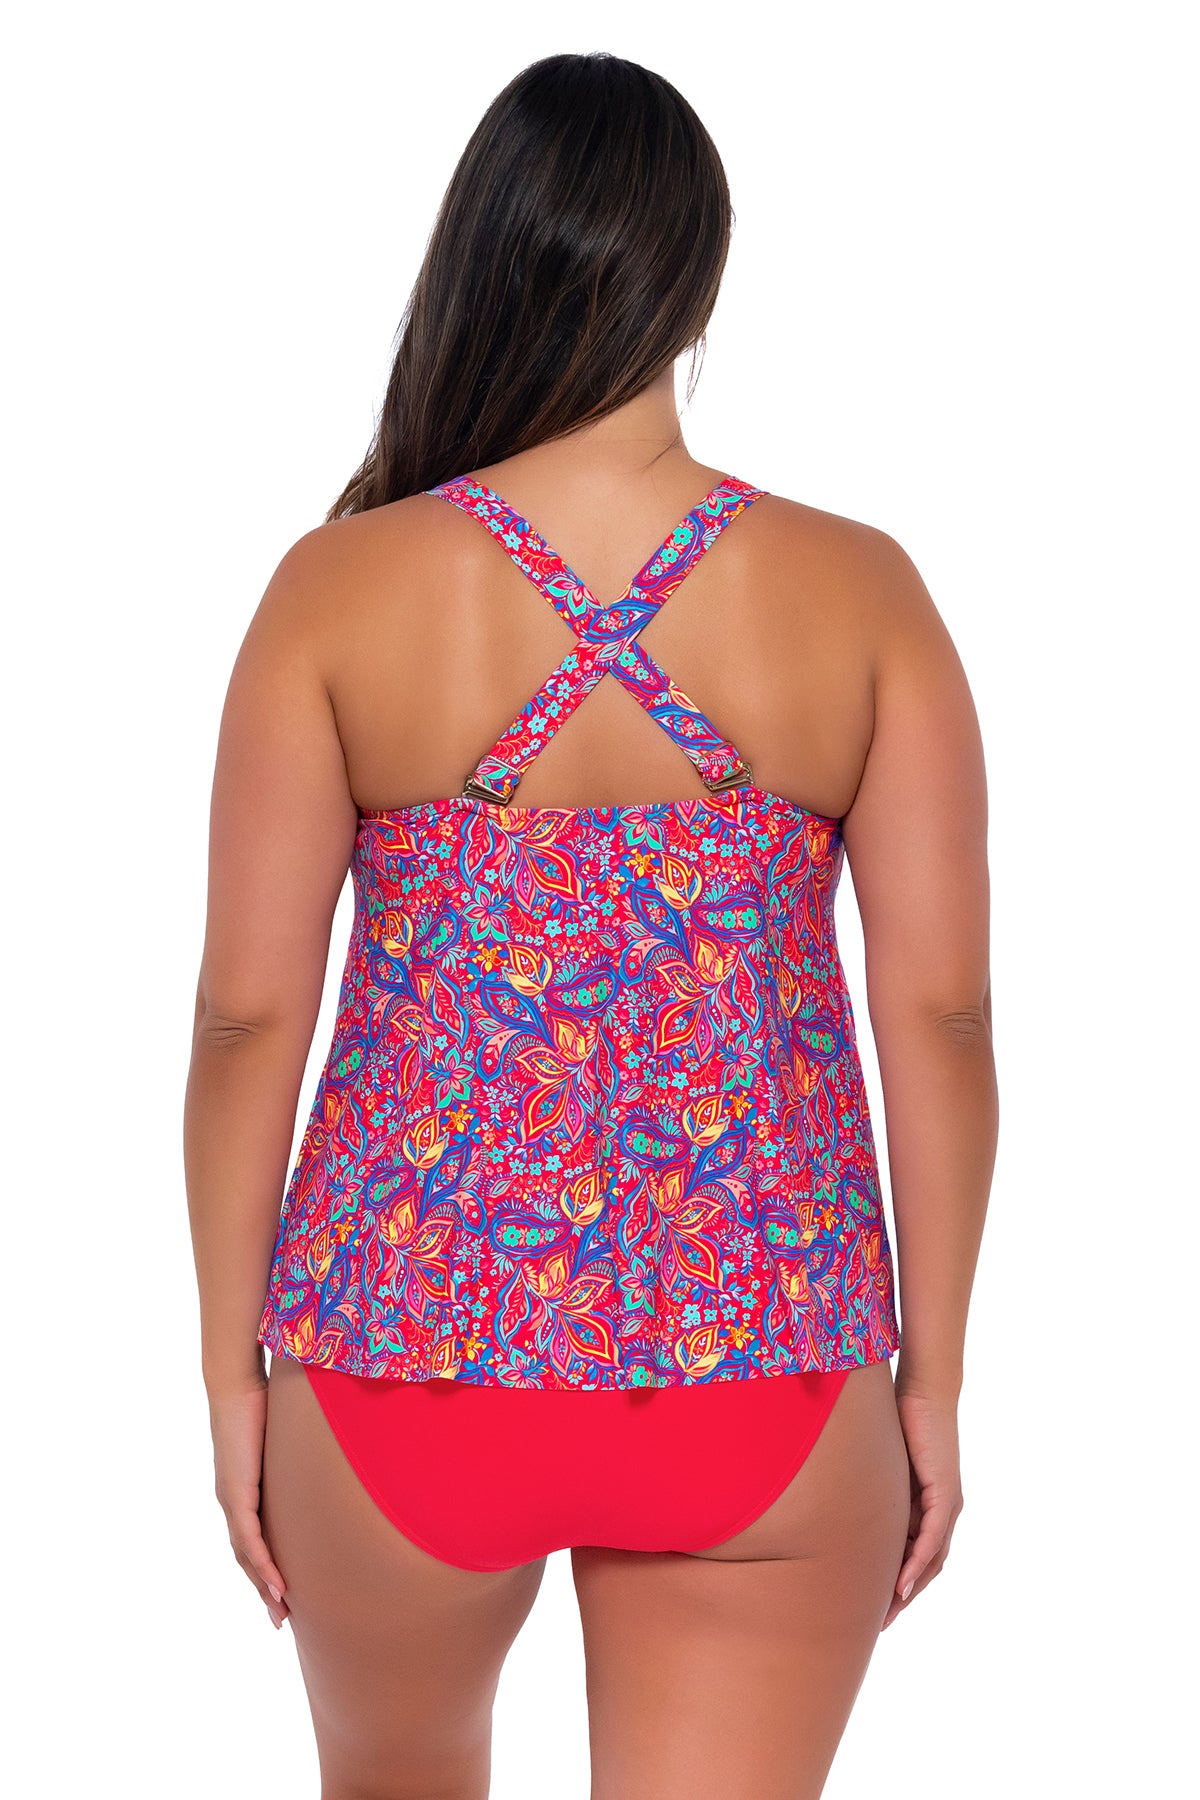 Back pose #1 of Nicky wearing Sunsets Escape Rue Paisley Sadie Tankini Top showing crossback straps with matching Hannah High Waist bikini bottom